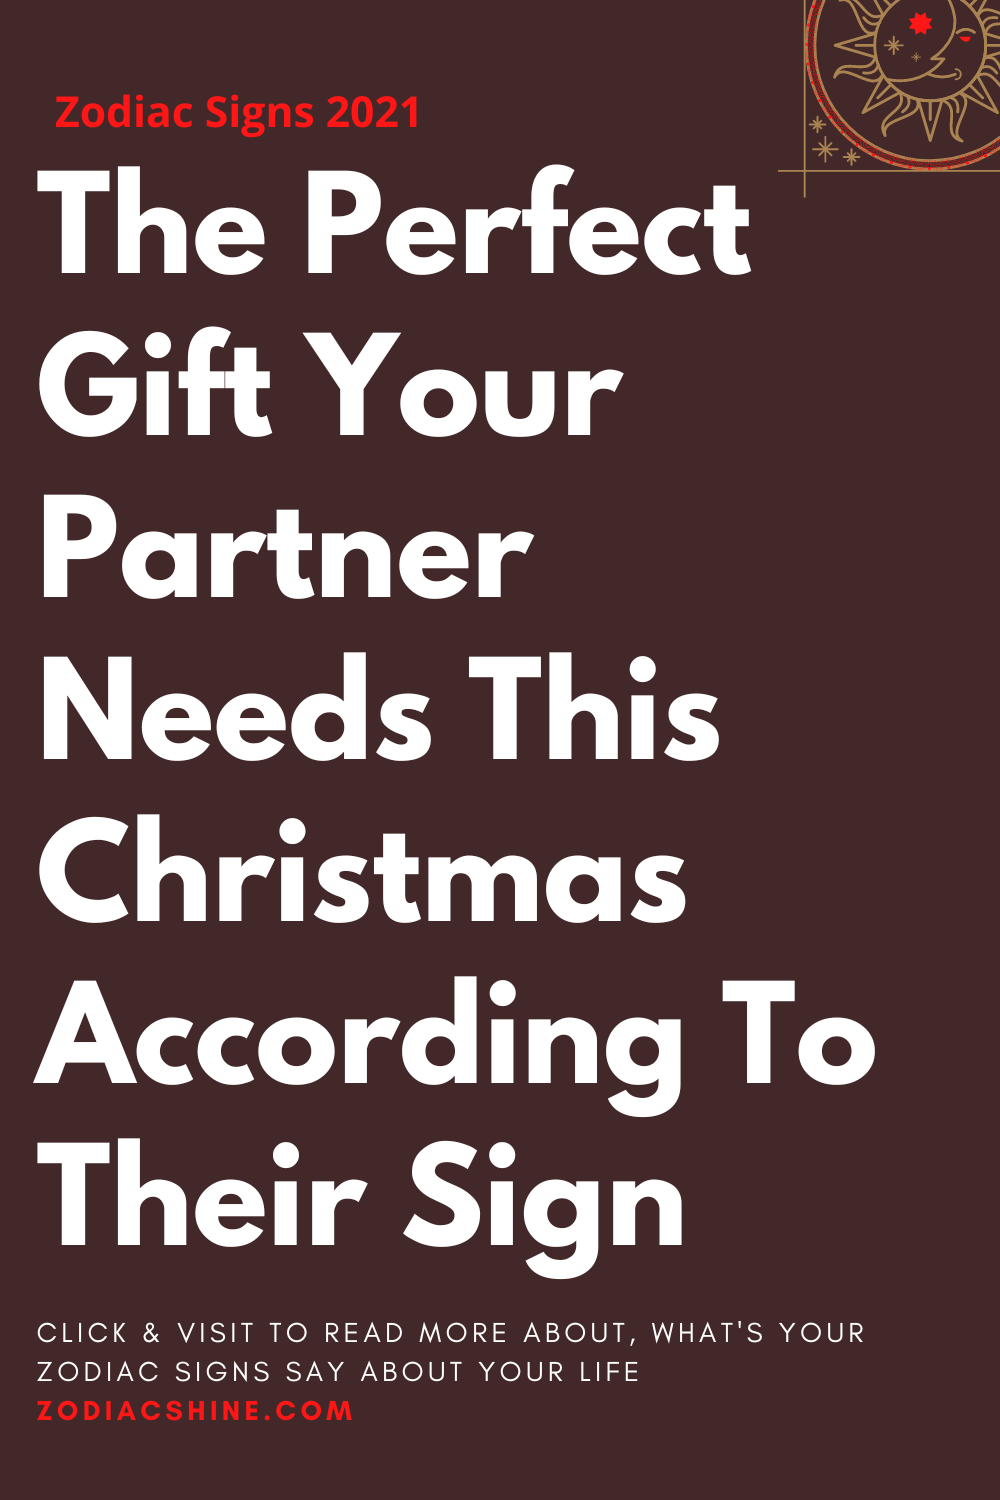 The Perfect Gift Your Partner Needs This Christmas According To Their Sign